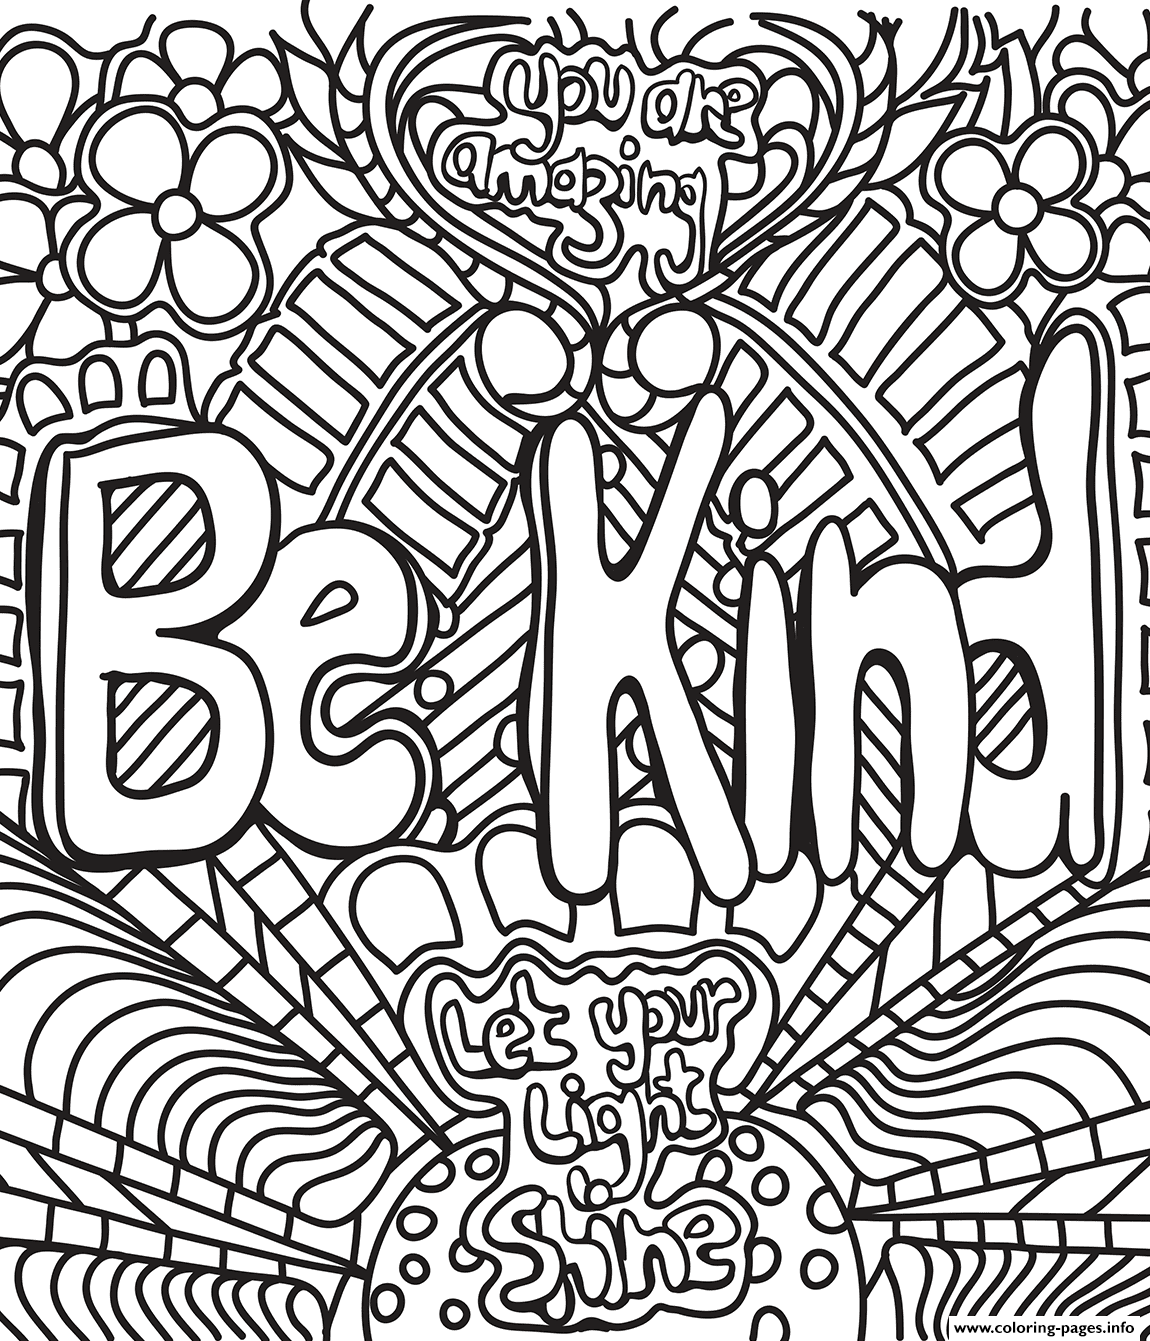 Be Kind coloring